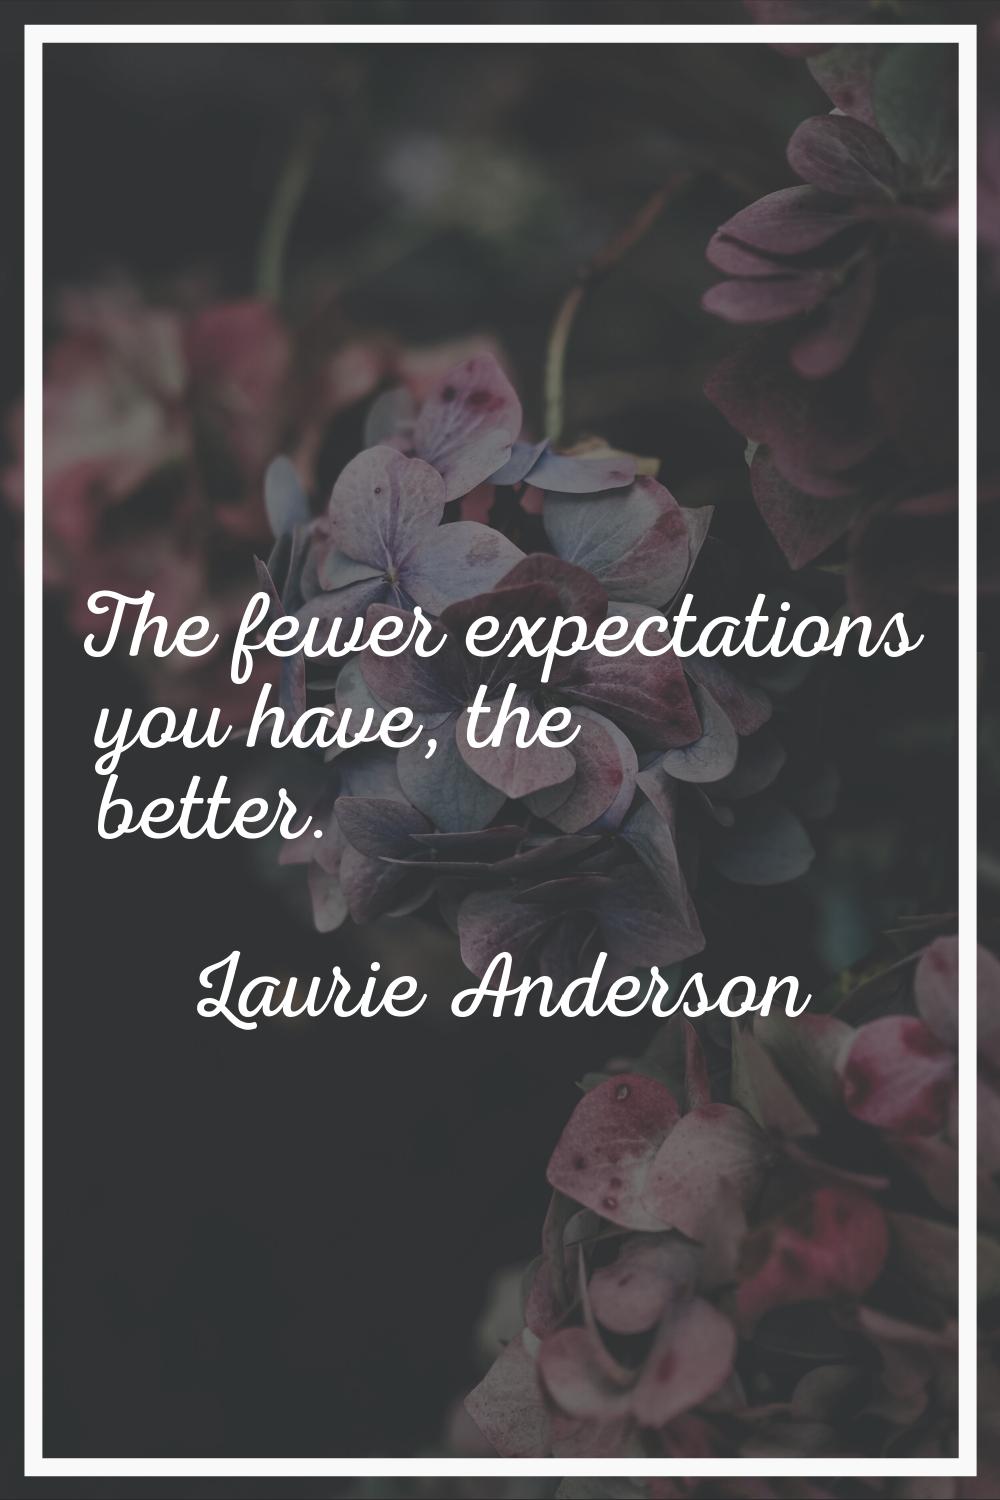 The fewer expectations you have, the better.